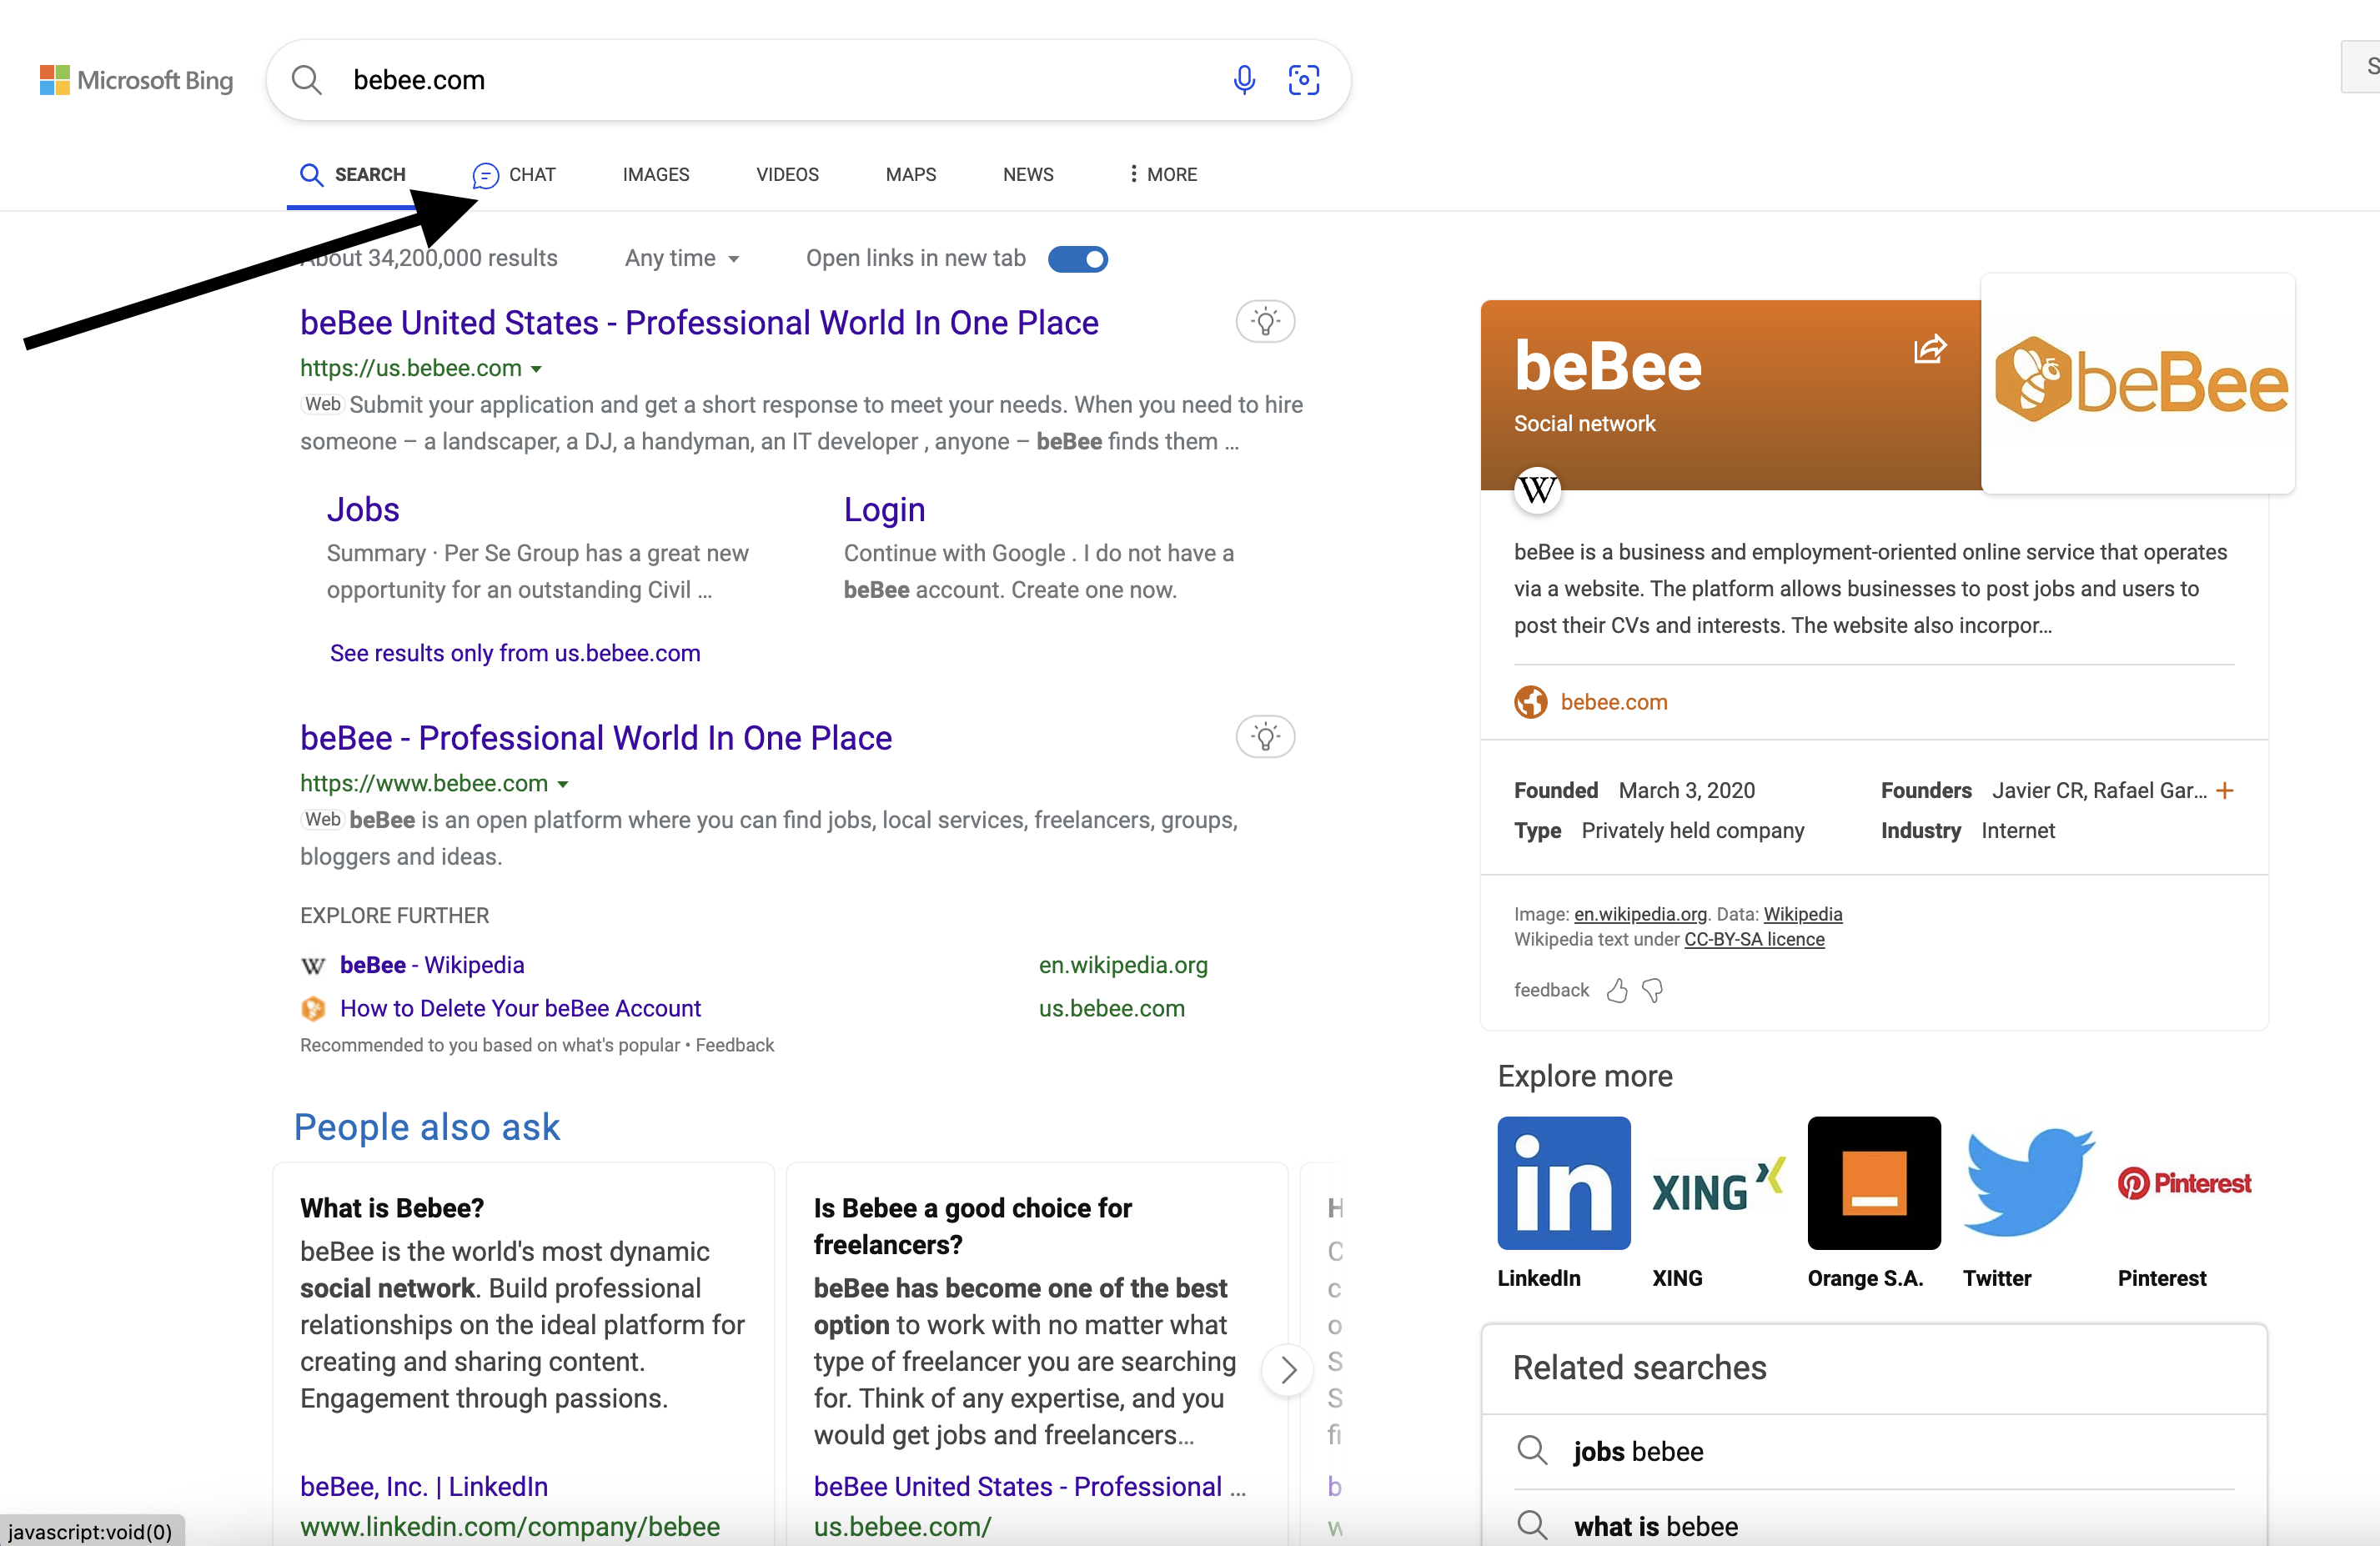 2% Microsoft Bing Q_ bebee.com 9

Q SEARCH = CHAT IMAGES VIDEOS MAPS NEWS { MORE

  
 
 

ut 34,200,000 results Any time ~ Open links in new tab  @D

beBee United States - Professional World In One Place Q

https://us.bebee.com ~ beBee b B
Web Submit your application and get a short response to meet your needs. When you need to hire e ee

Social network

   

someone - a landscaper, a DJ, a handyman, an IT developer, anyone - beBee finds them ...

W

Jobs Login
Summary - Per Se Group has a great new Continue with Google . | do not have a beBee is a business and employment-oriented online service that operates
opportunity for an outstanding Civil ... beBee account. Create one now. via a website. The platform allows businesses to post jobs and users to

post their CVs and interests. The website also incorpor...

Oo bebee.com

See results only from us.bebee.com

 

beBee - Professional World In One Place G
https://www.bebee.com ~ Founded March 3, 2020 Founders Javier CR, Rafael Gar... +
web beBee is an open platform where you can find jobs, local services, freelancers, groups, Type Privately held company Industry Internet
bloggers and ideas.
EXPLORE FURTHER Image: en.wikipedia.org. Data: Wikipedia
Wikipedia text under CC-BY-SA licence
WwW beBee - Wikipedia en.wikipedia.org
feedback 4H <<
+2 How to Delete Your beBee Account us.bebee.com

Recommended to you based on what's popular + Feedback

Explore more

People also ask
? Pinterest
What is Bebee? Is Bebee a good choice for Xl NG yy ®
freelancers? (

H
beBee is the world's most dynamic
social network. Build professional beBee has become one of the best C Linkedin XING Orange S.A. Twitter Pinterest
relationships on the ideal platform for option to work with no matter what C
creating and sharing content. type of freelancer you are searching 3 Related searches
Engagement through passions. for. Think of any expertise, and you

would get jobs and freelancers... f Q_ jobs bebee

beBee, Inc. | LinkedIn beBee United States - Professional ... b
javascript:void(0) www.linkedin.com/company/bebee us.bebee.com/ v Q_ what is bebee